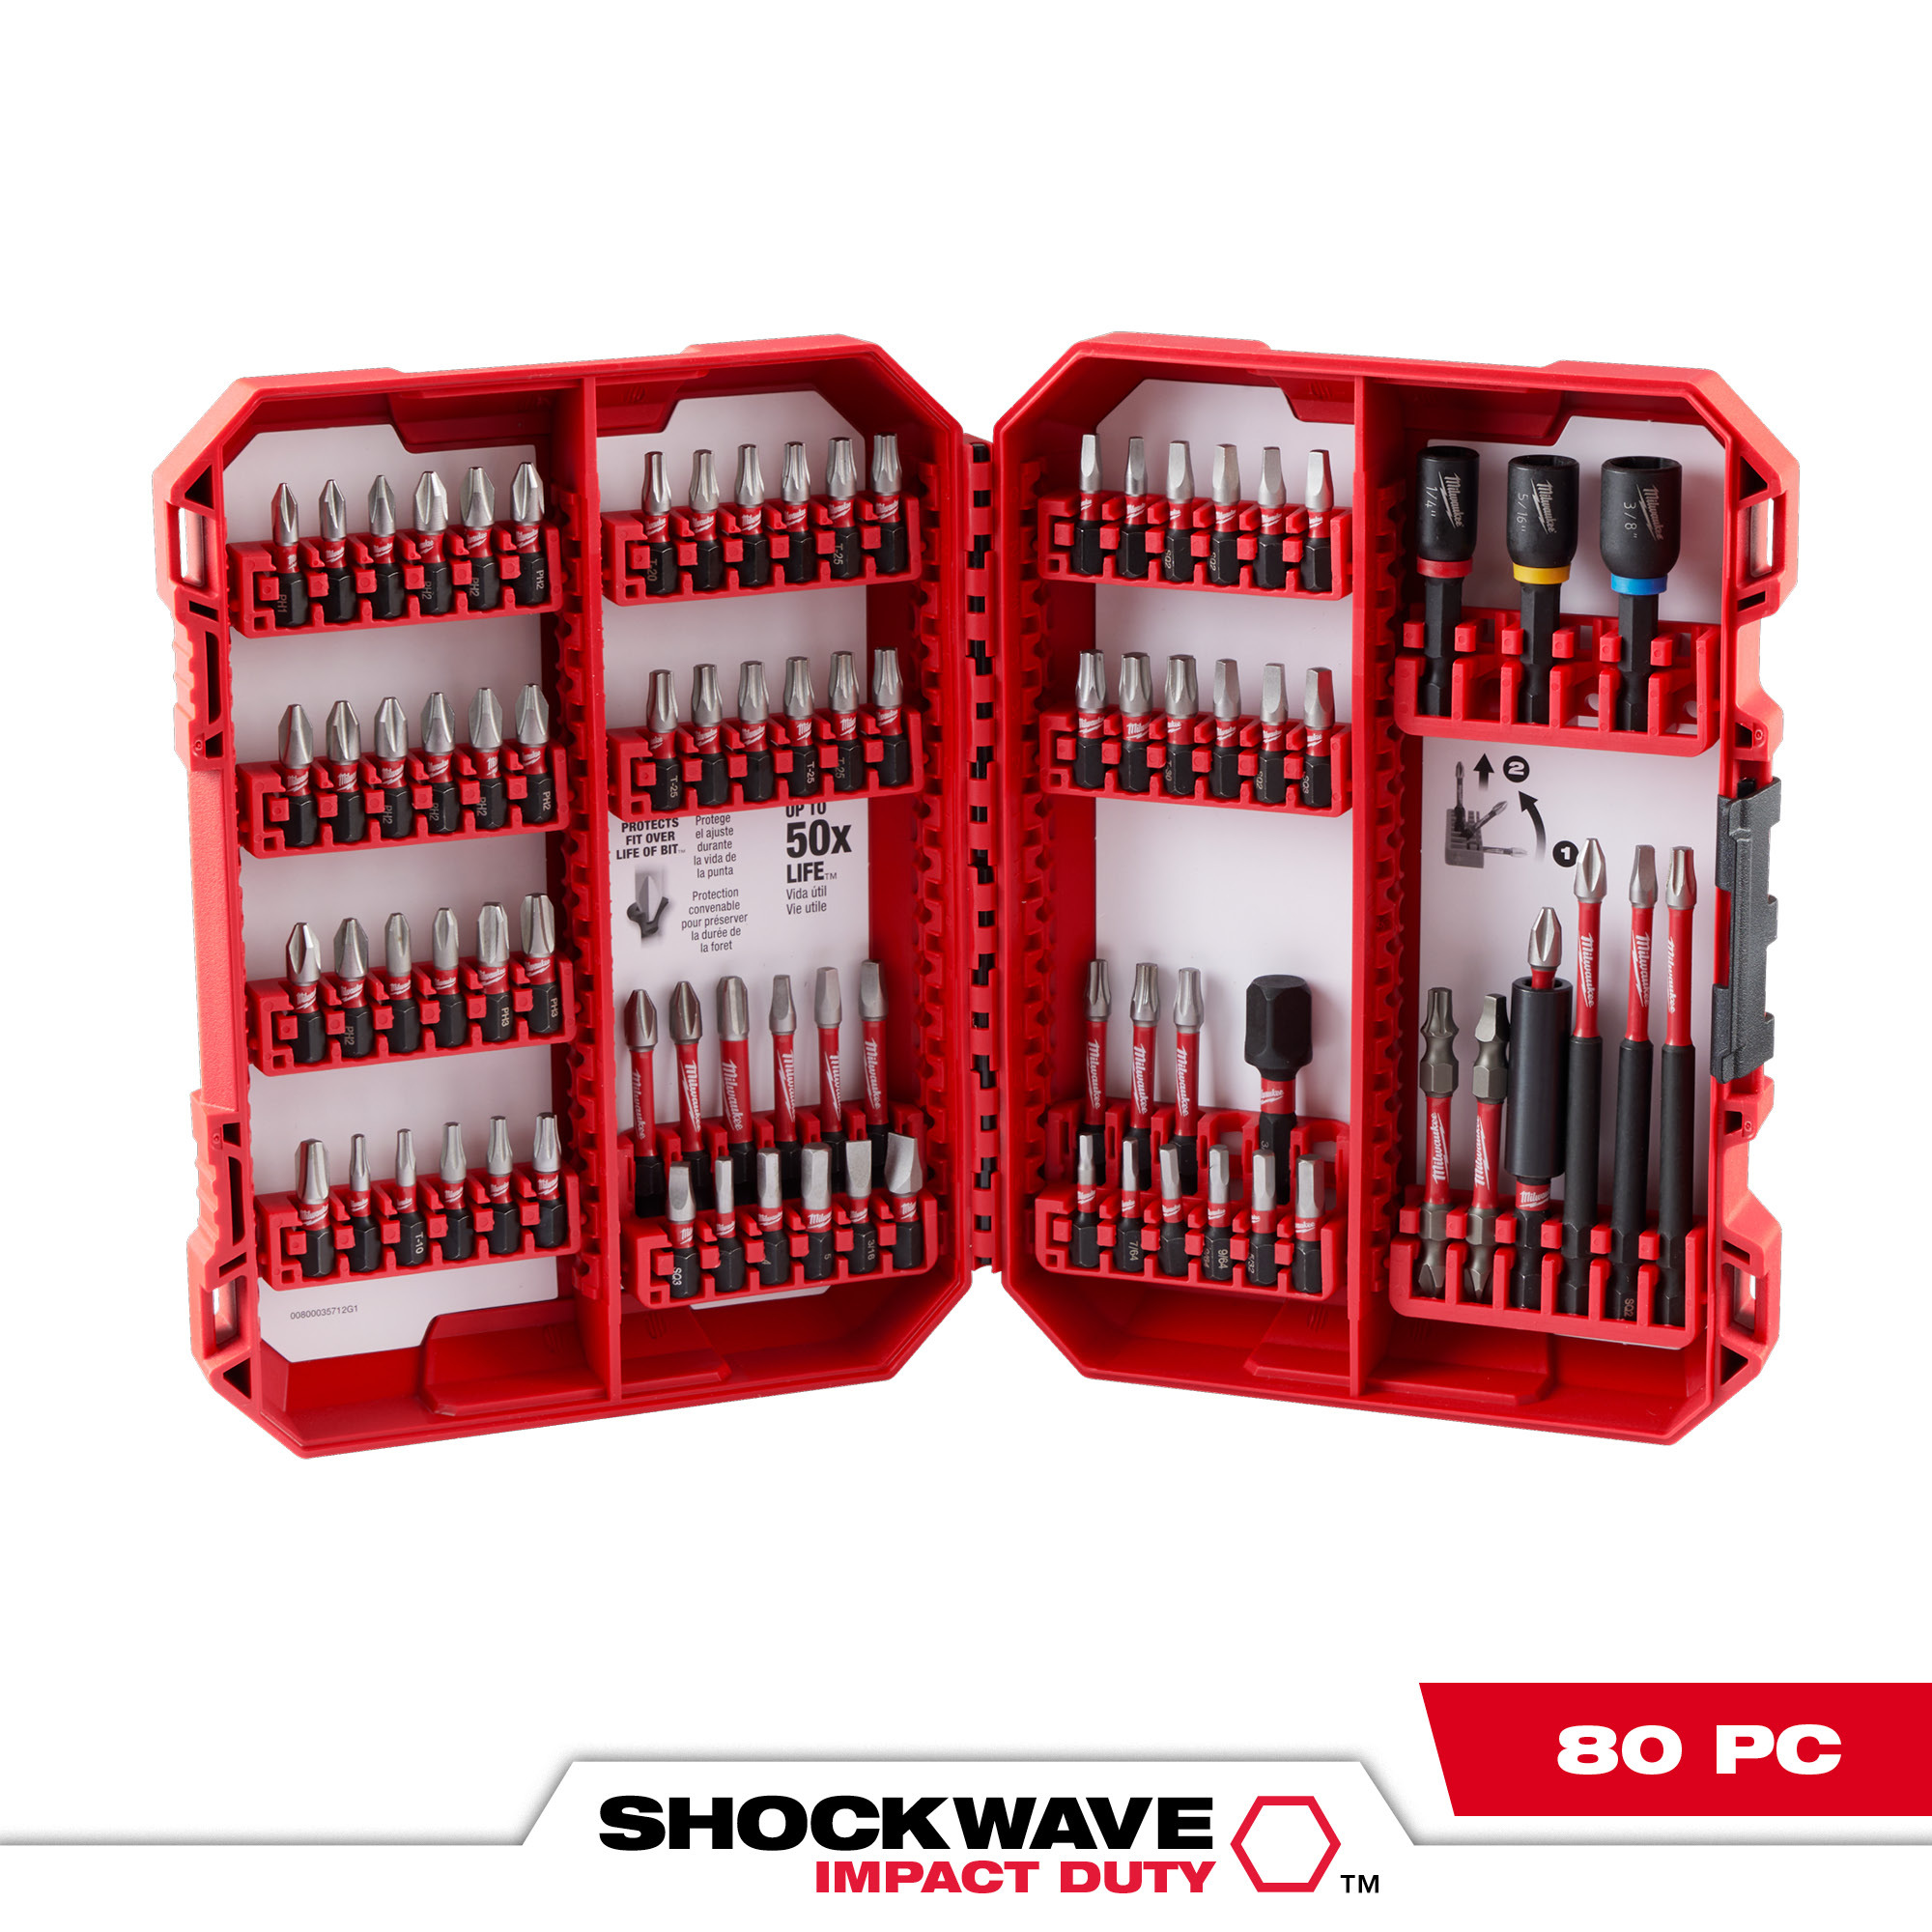 Milwaukee, SHOCKWAVE Impact Duty Driver Bit Set - 80PC, Included (qty.) 80 Model 48-32-4094